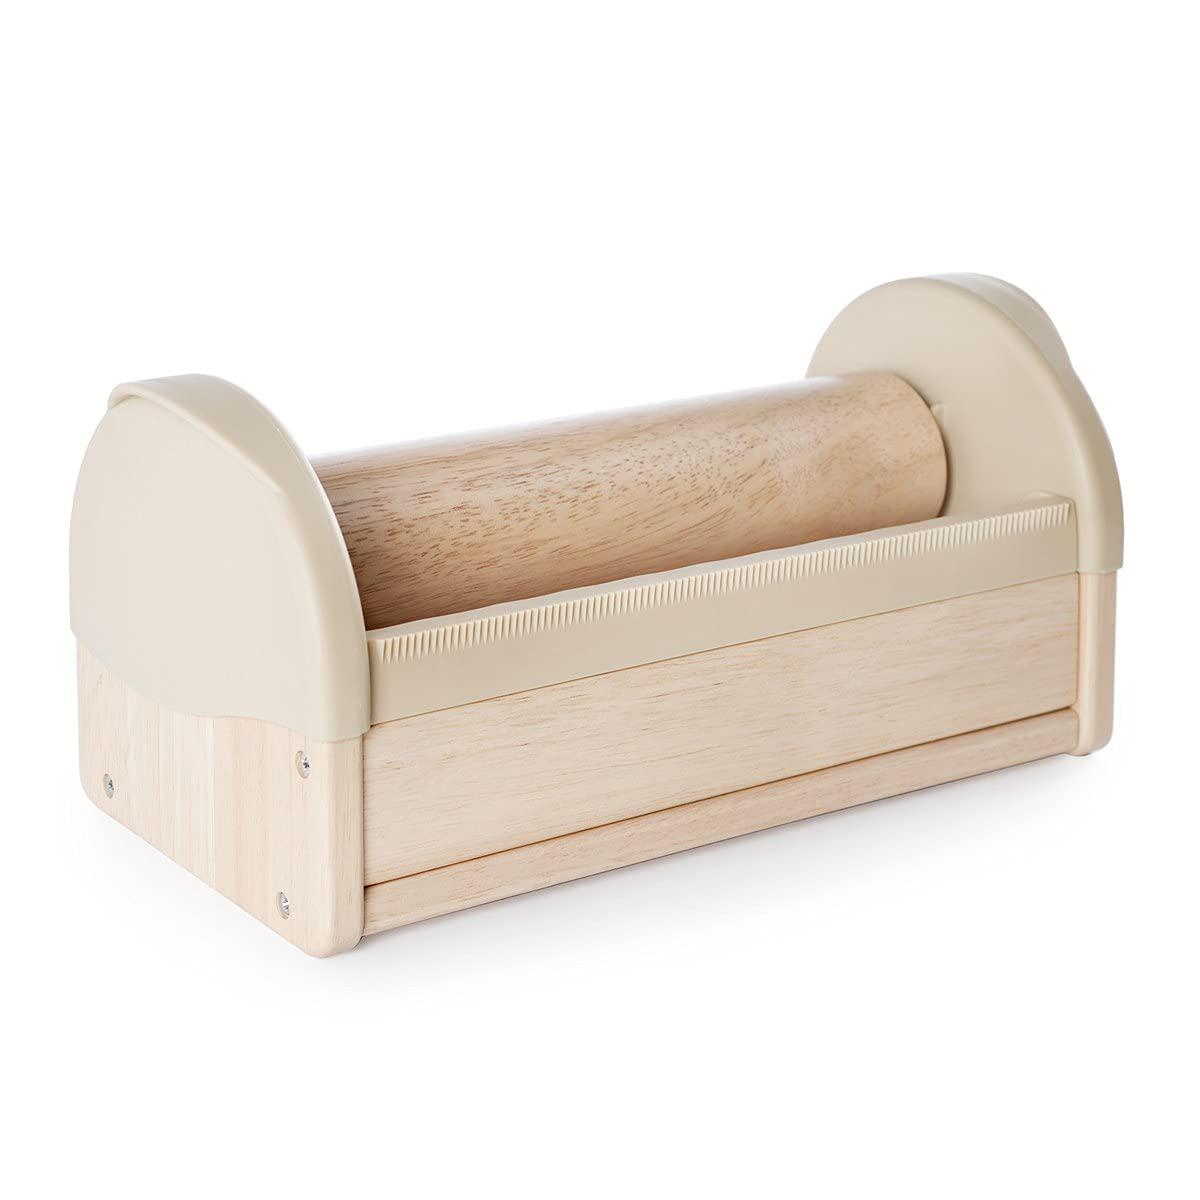 Kaplan Early Learning Company kaplan early learning wooden tape dispenser with eight 1" colorful rolls of craft tape